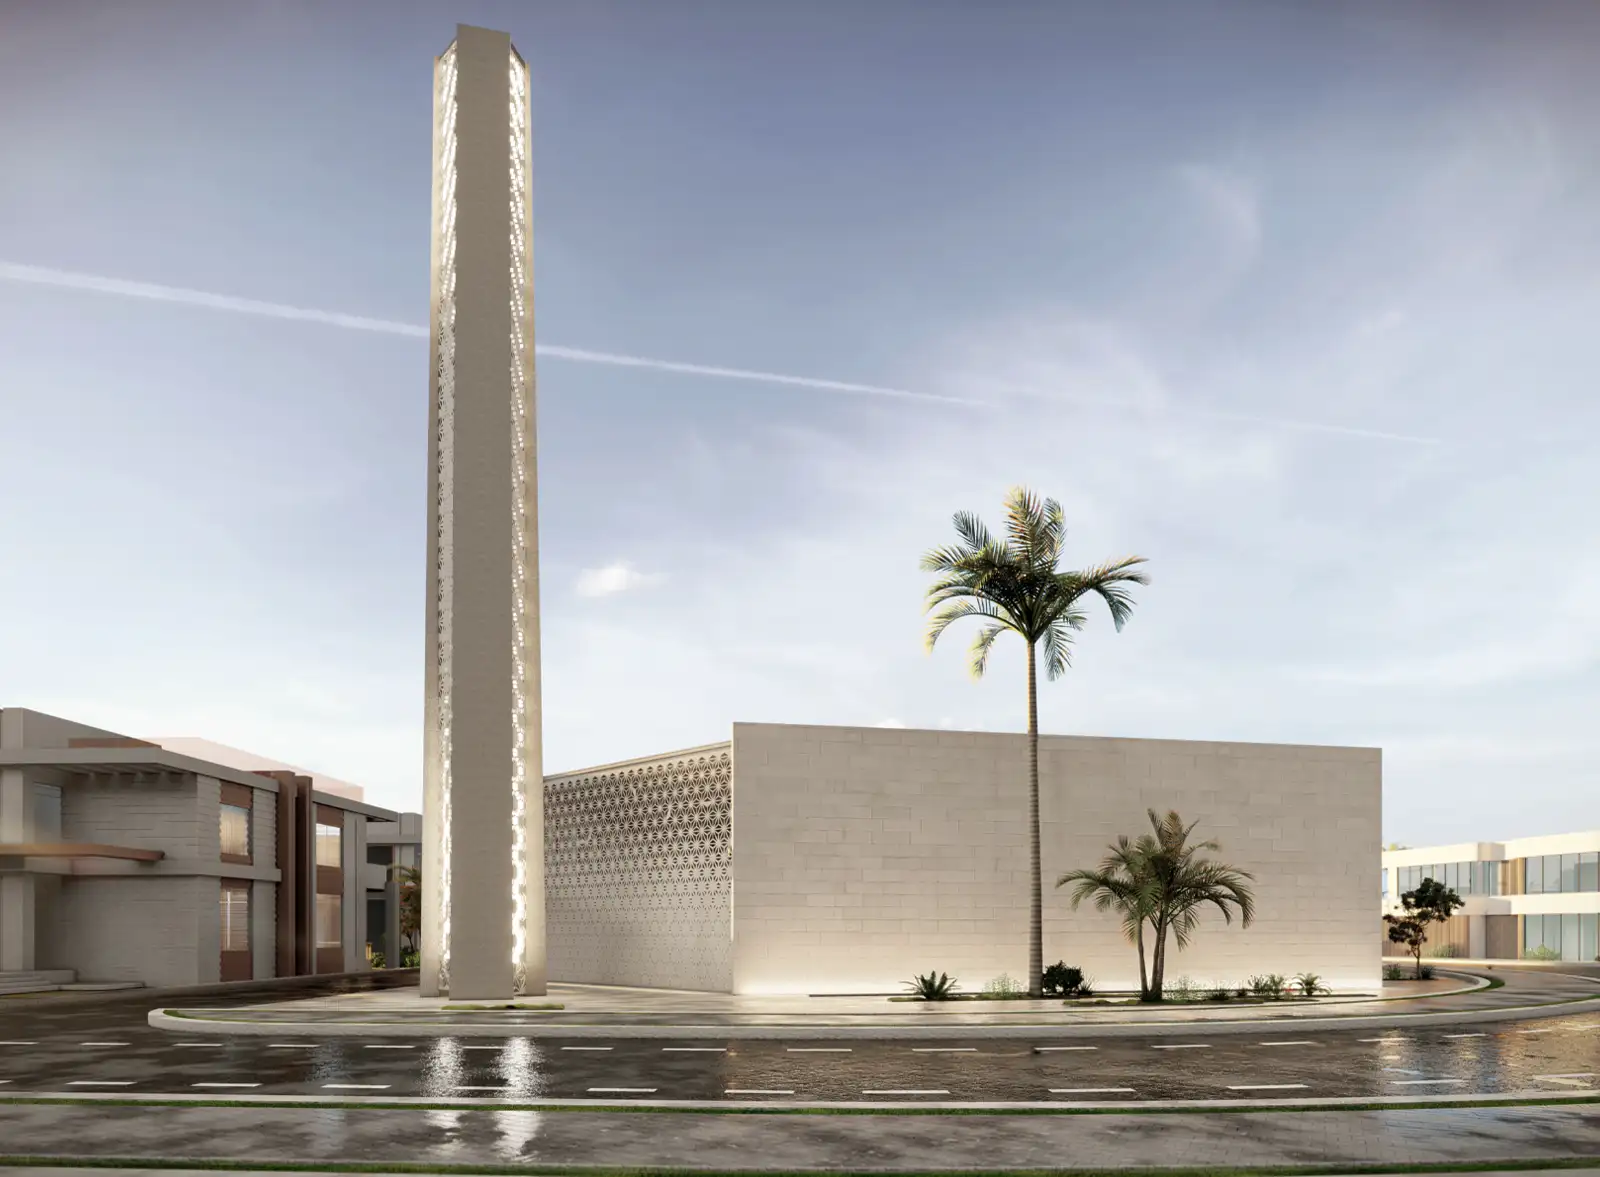 Modern mosque architecture featuring a tall, slender minaret with intricate detailing, adjacent to a simplistic white mosque facade, complemented by tropical palm trees under a clear sky, symbolizing a blend of traditional elements and contemporary design